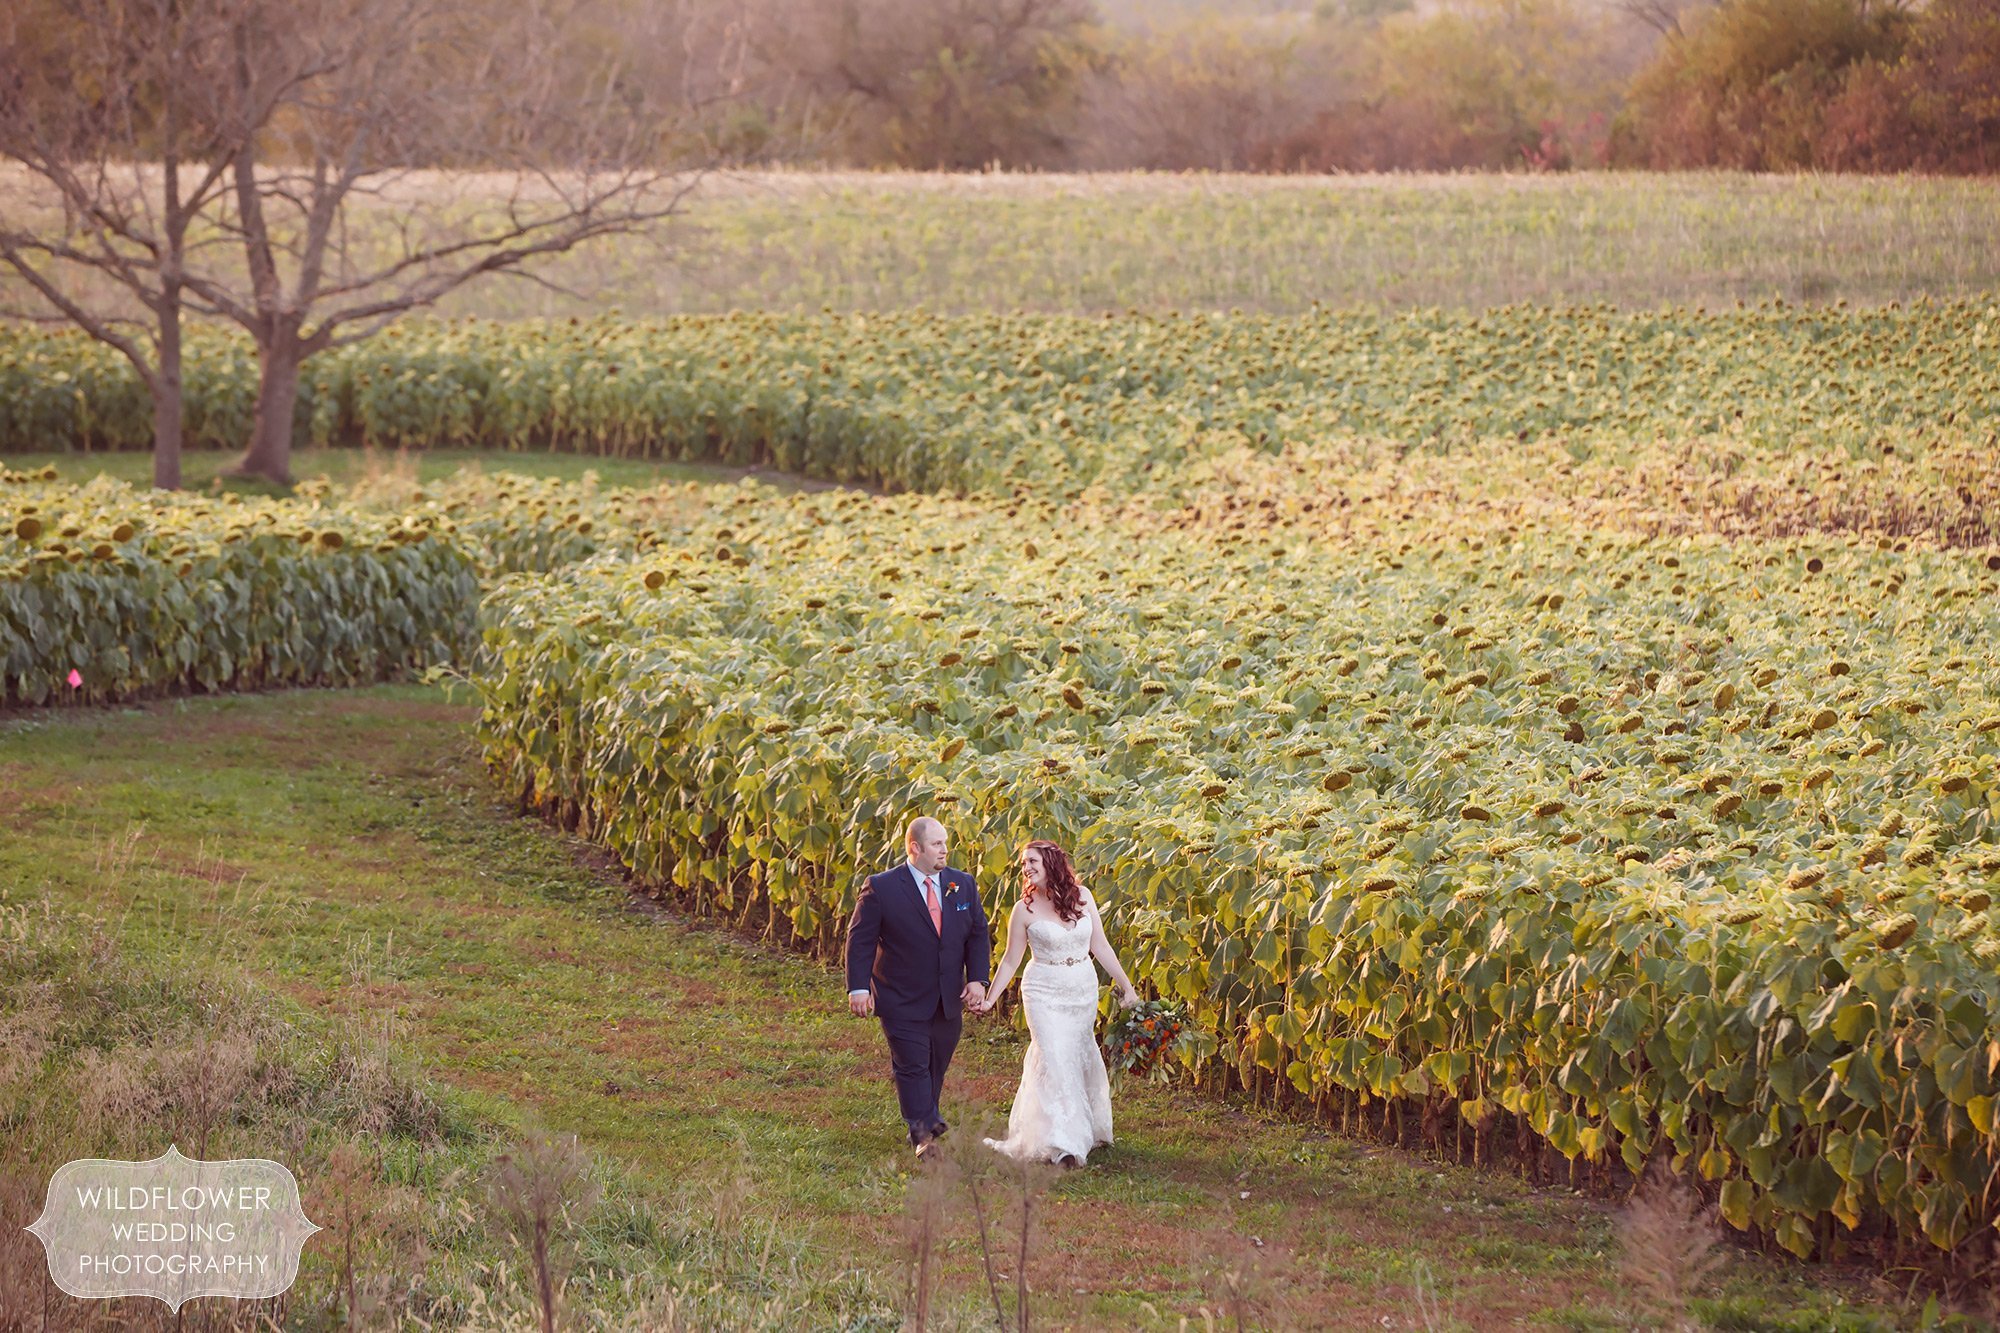 Bride and groom walk next to a field of sunflowers at the Schwinn Produce Farm in October.